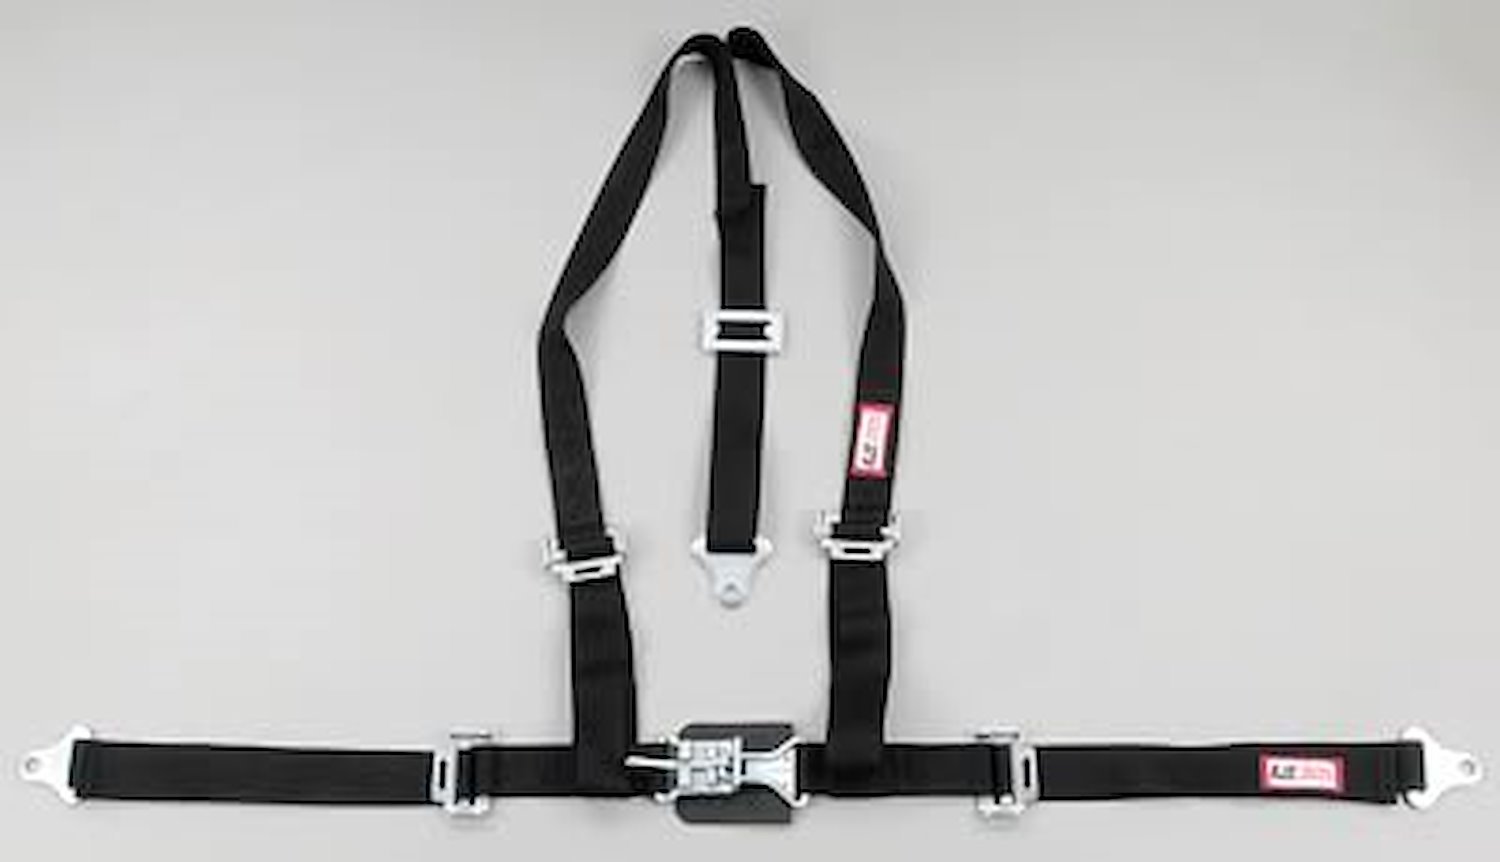 NON-SFI L&L HARNESS 2 PULL UP Lap Belt SEWN IN 2 S.H. V ROLL BAR Mount ALL SNAP ENDS ORANGE